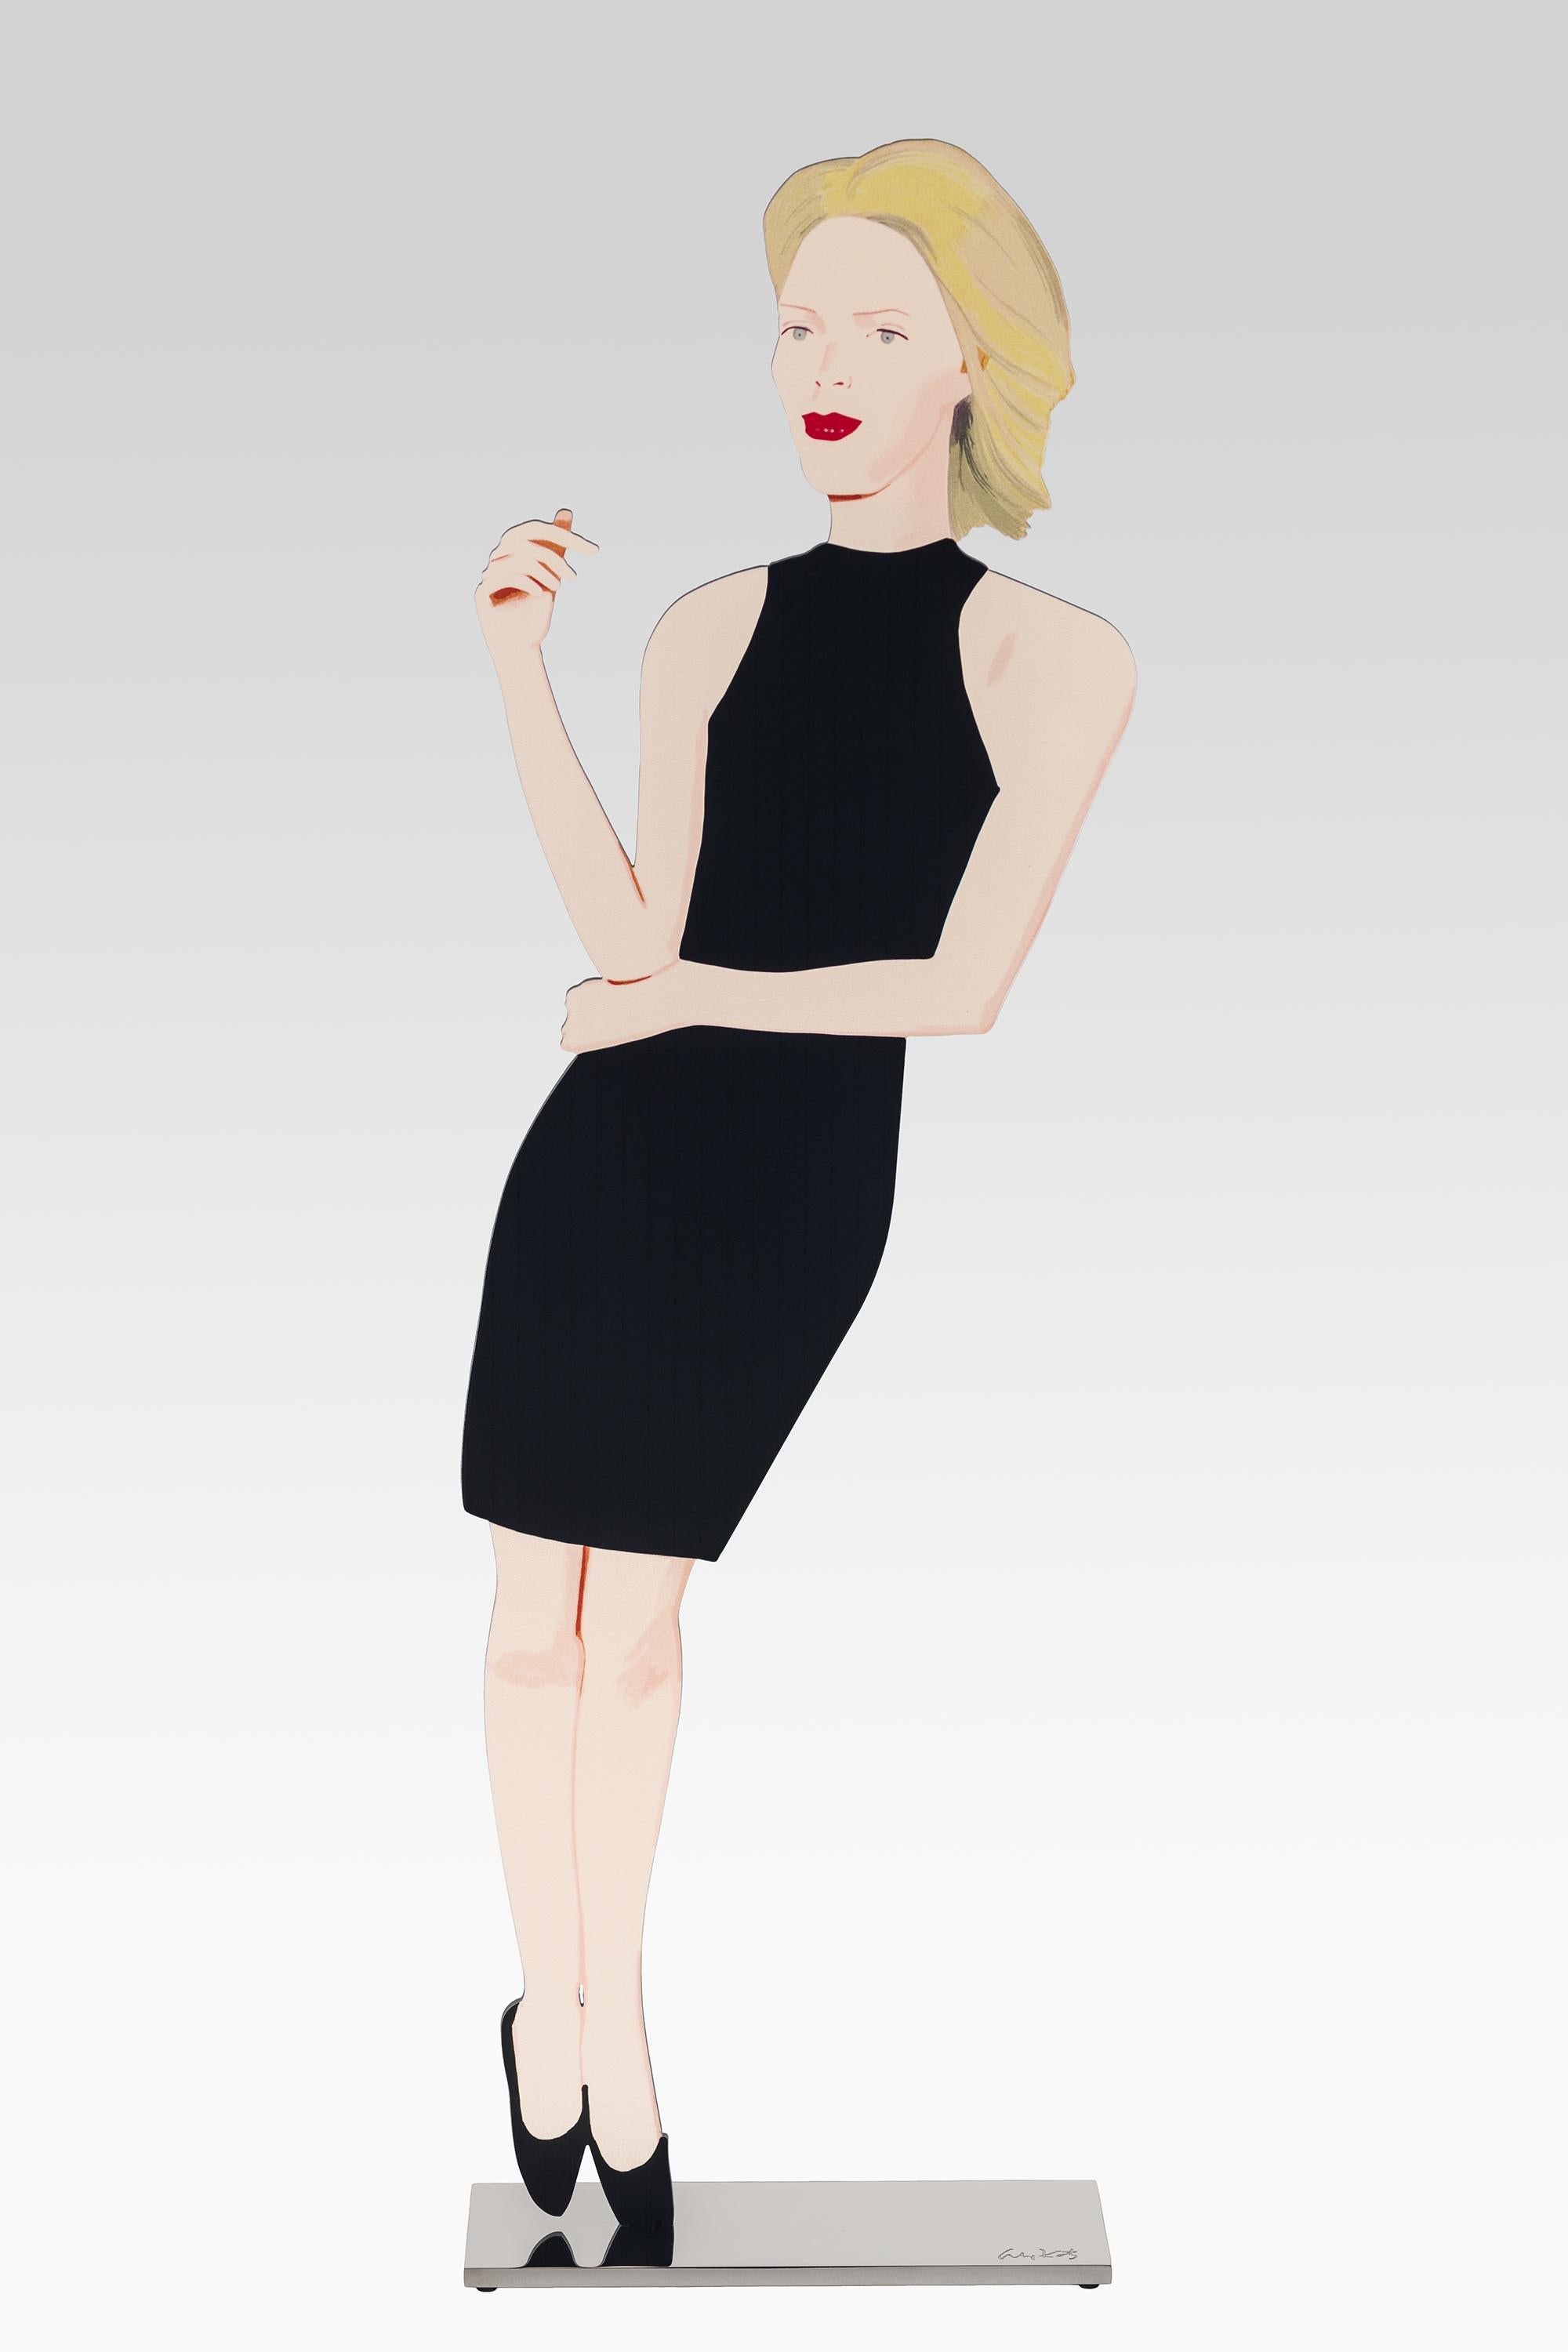 The "Black Dress" sculptures by Alex Katz are more than figurative sculptures. They are a homage to elegance, fashion and the female body. This cut-out is made from powder-coated aluminium and stands on an aluminium plinth. 58 x 18 cm. Edition of